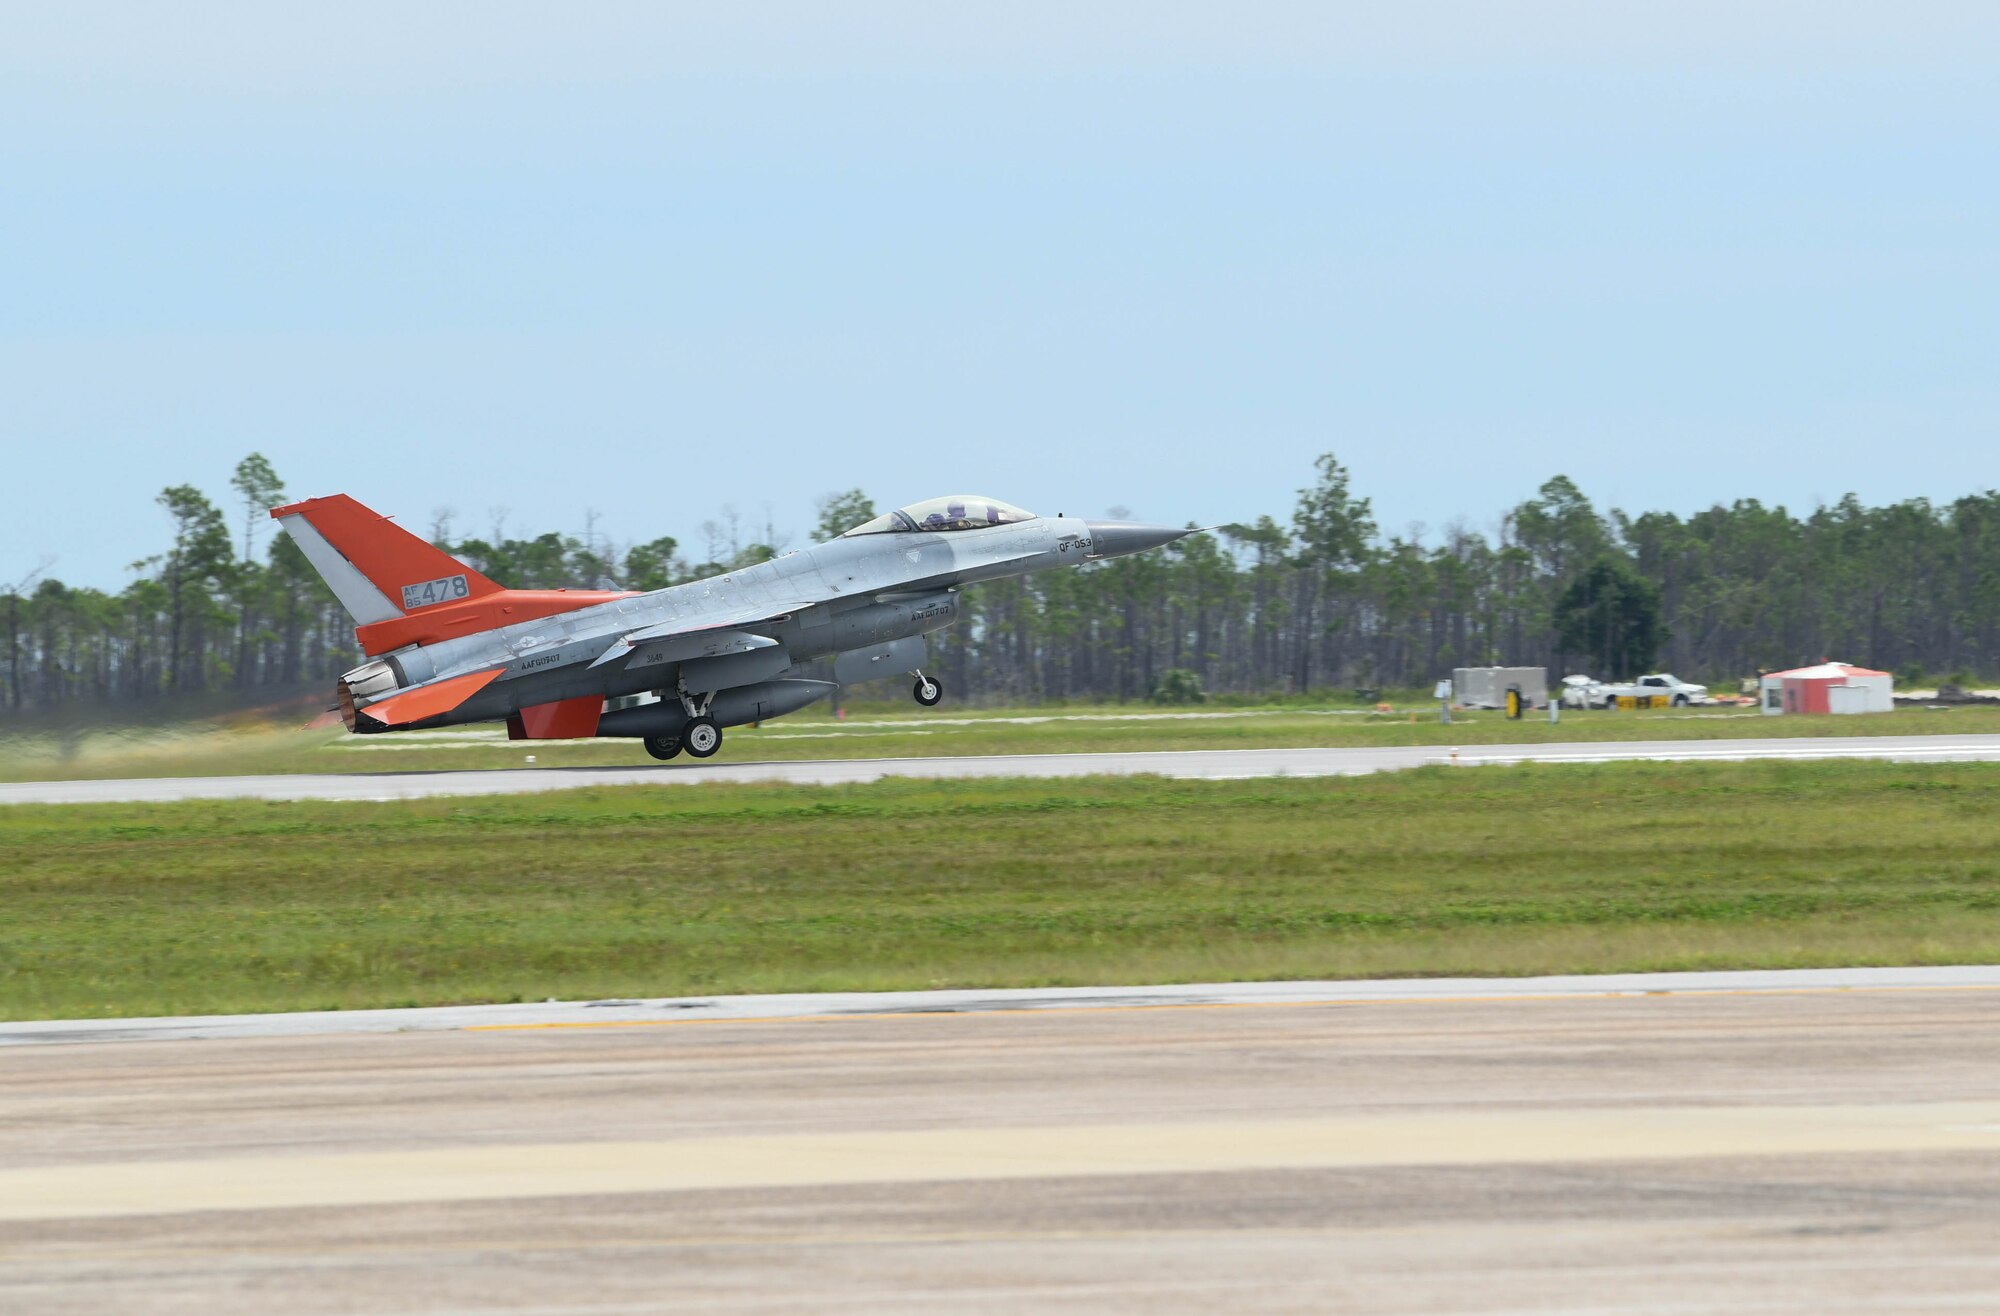 A QF-16 from the 82nd Aerial Targets Squadron takes off from Tyndall Air Force Base, Florida, Aug. 21, 2020. The aircraft evacuated the 325th Fighter Wing’s airfield to Shaw Air Force Base, South Carolina, due to the possibility of severe weather conditions. (U.S. Air Force photo by Airman Anabel Del Valle)